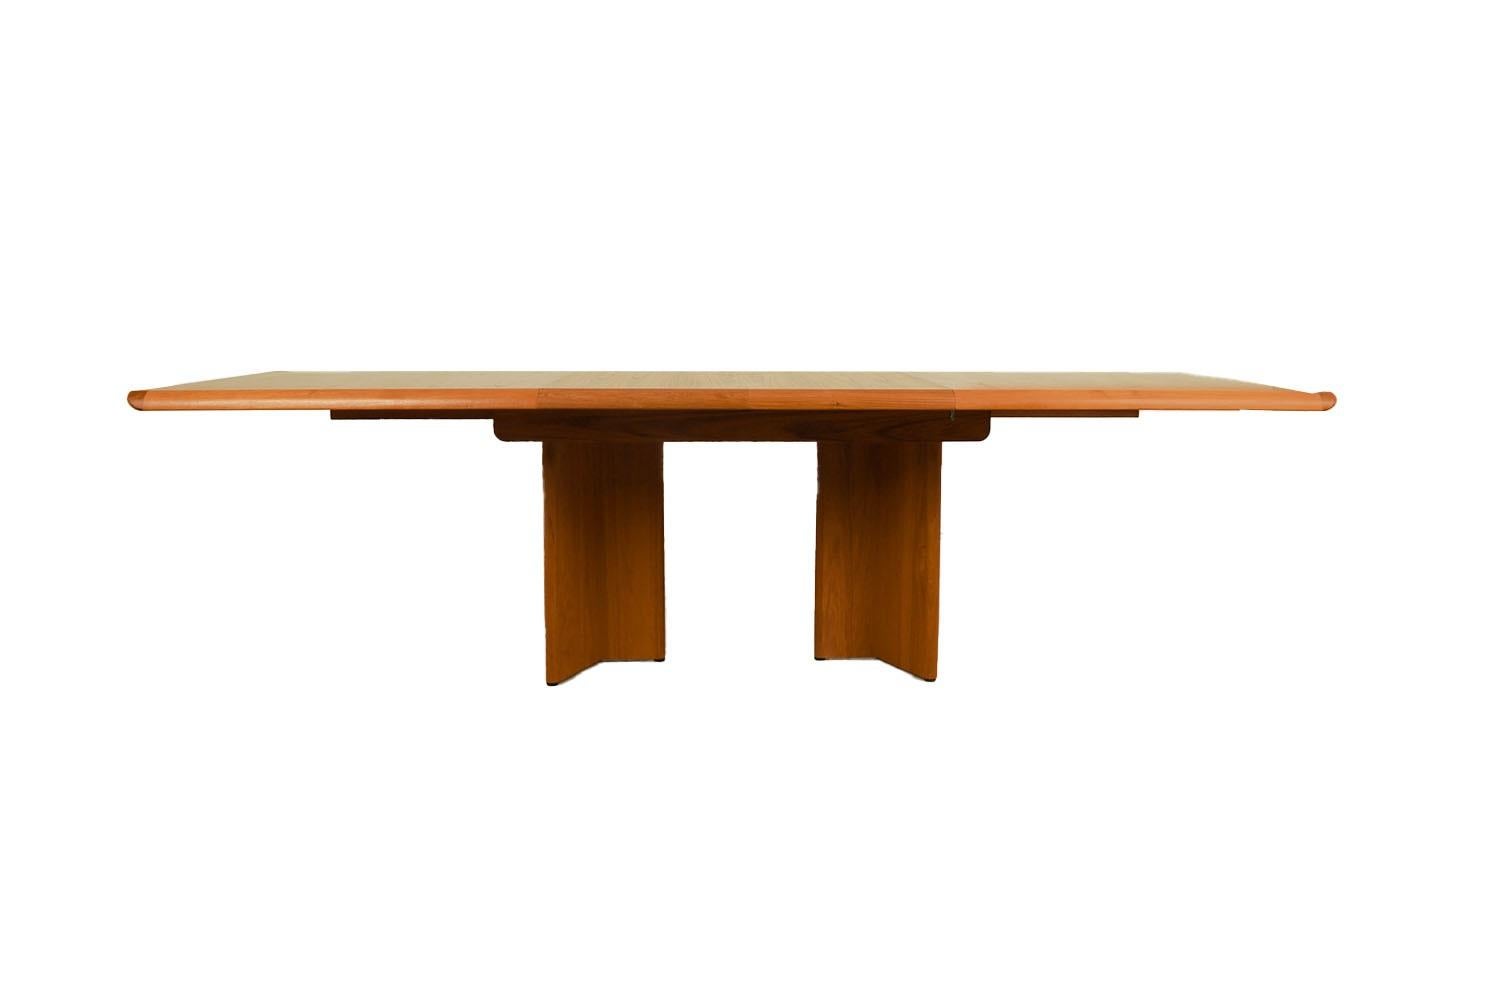 Beautiful Mid-Century Modern expandable dining table, by Henning Kjærnullf for Vejle Støle & Møbelfabrik, 1960's. Featuring richly grained, gleaming teak and smooth, clean lines characteristic of classic Danish design. This remarkable dining table